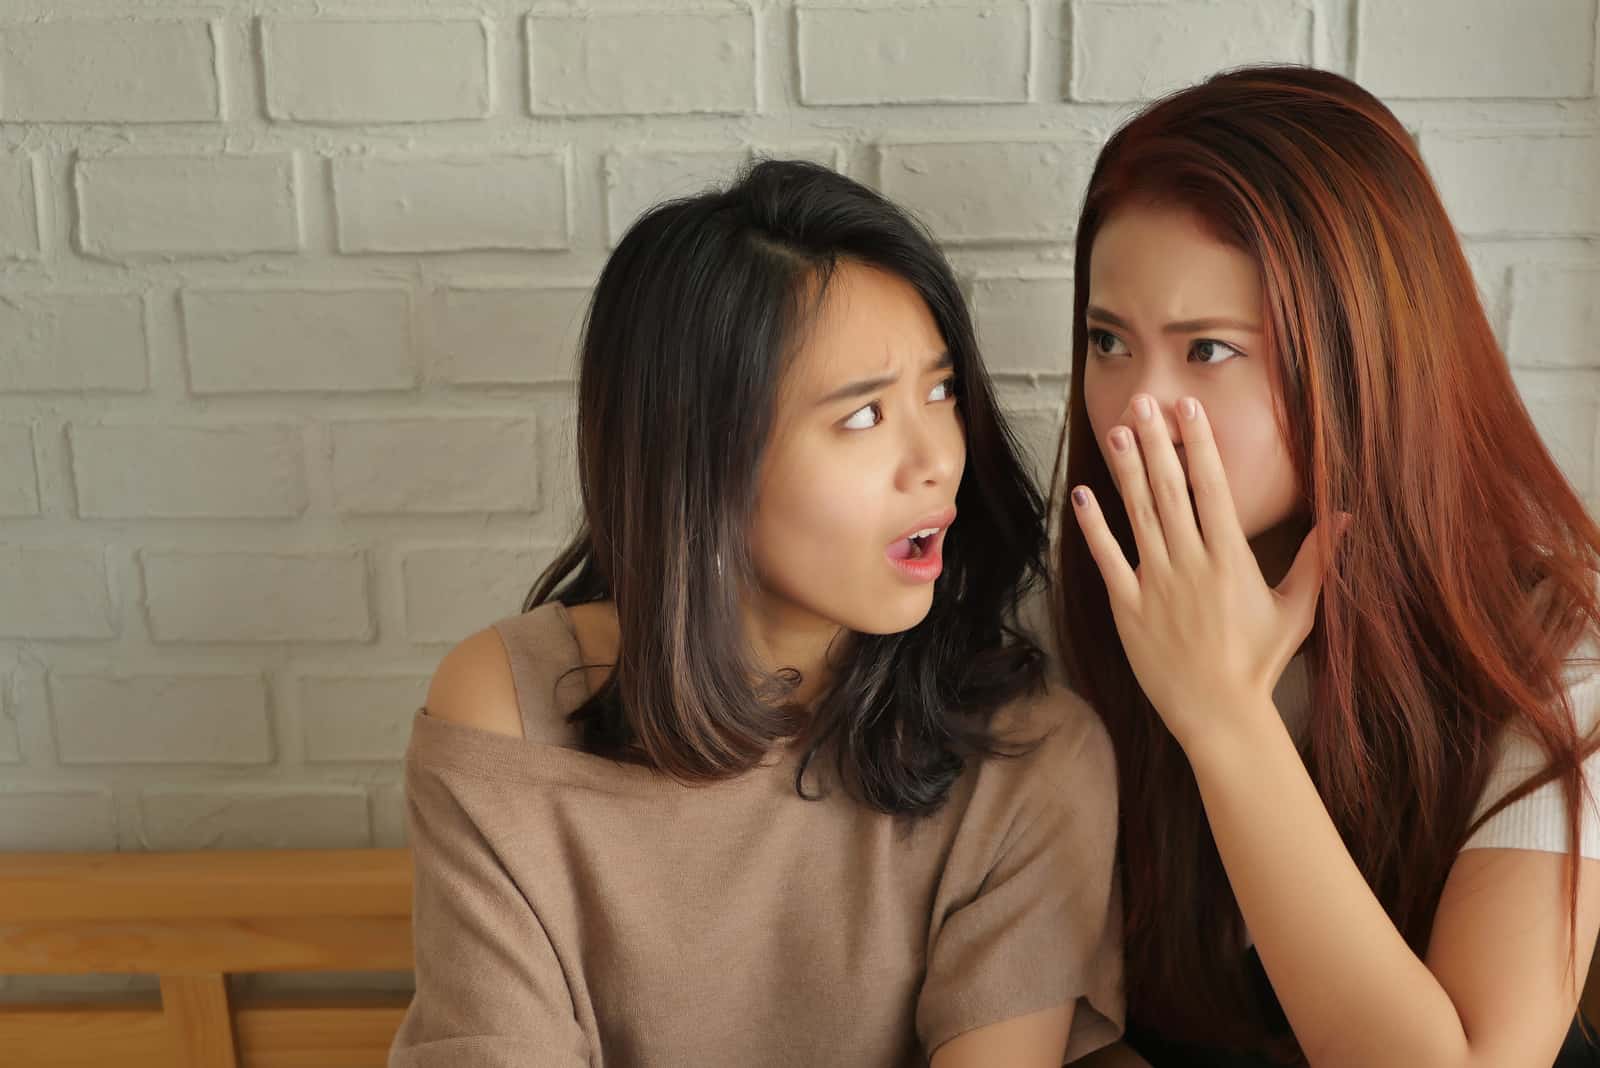 surprised excited woman gossiping to her friend